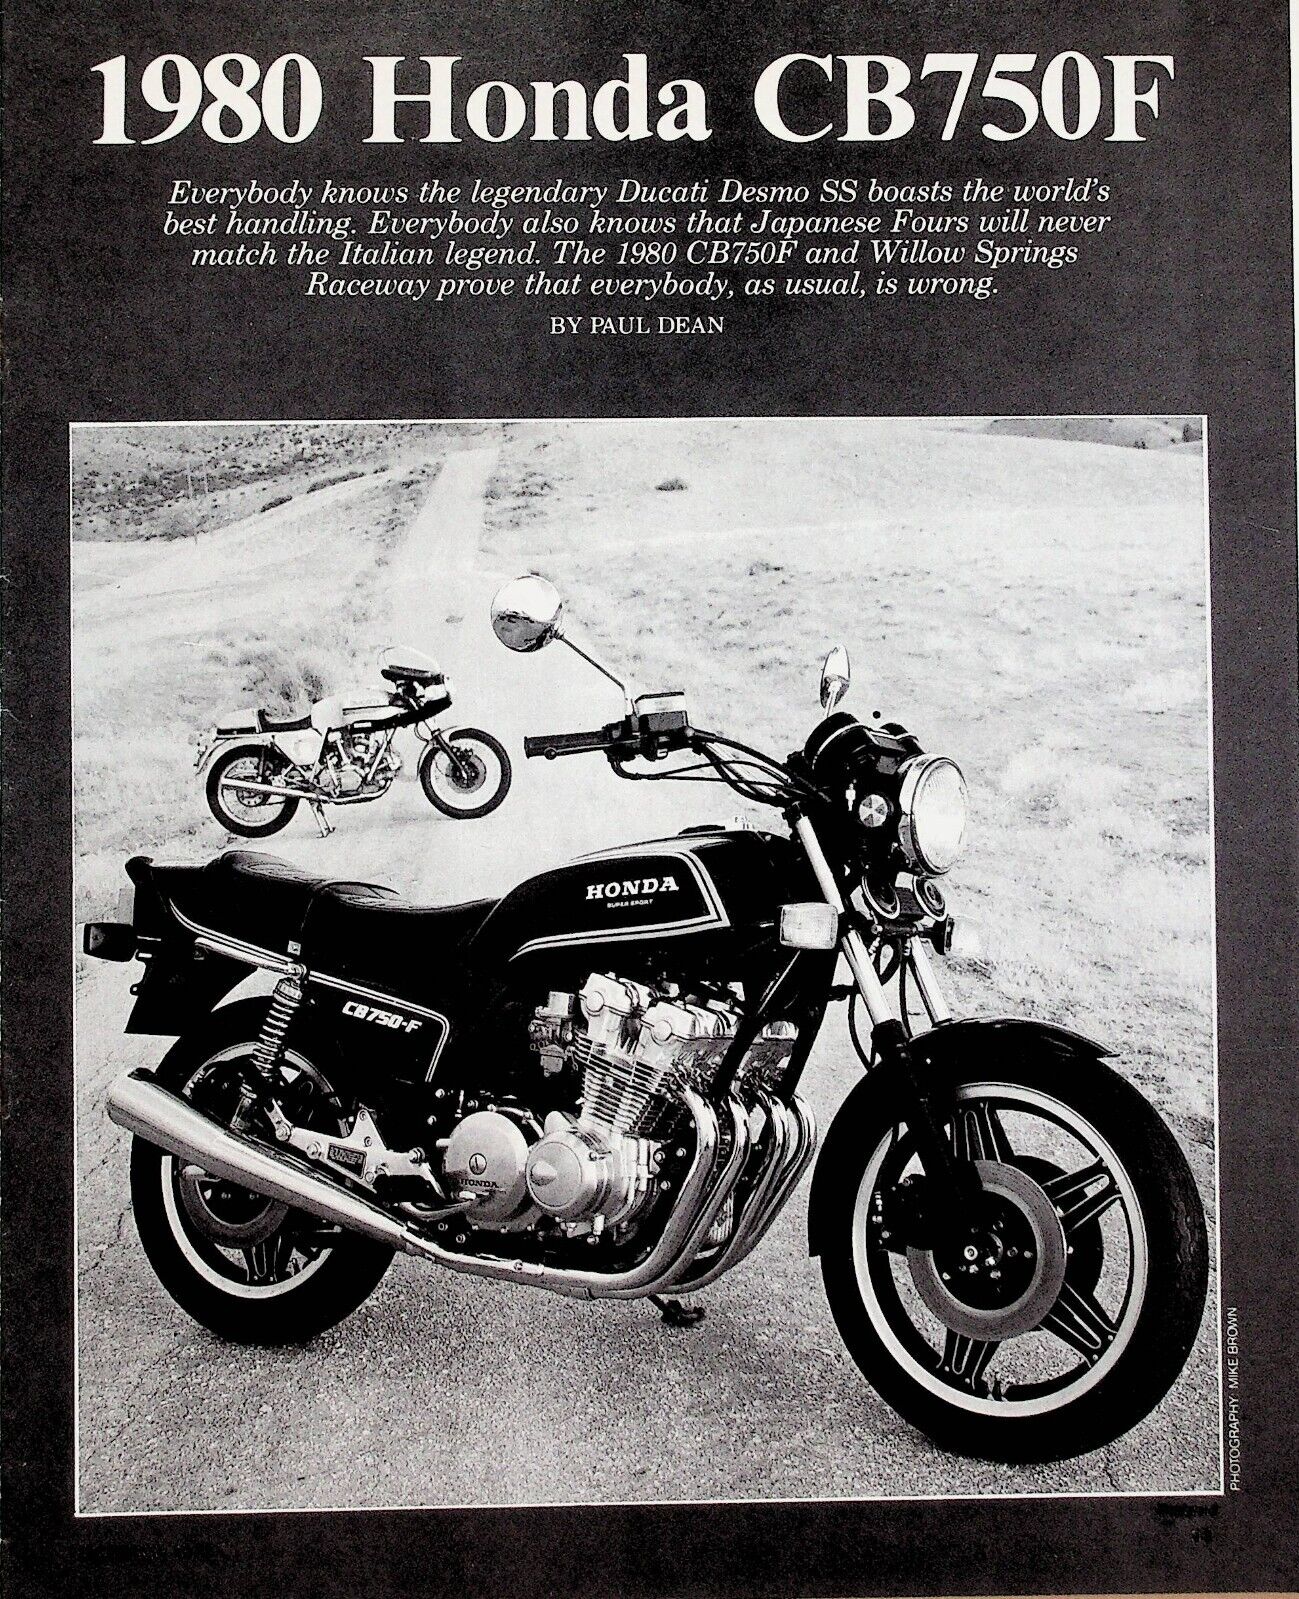 1980 Honda CB750F - 8-Page Vintage Motorcycle Test Article